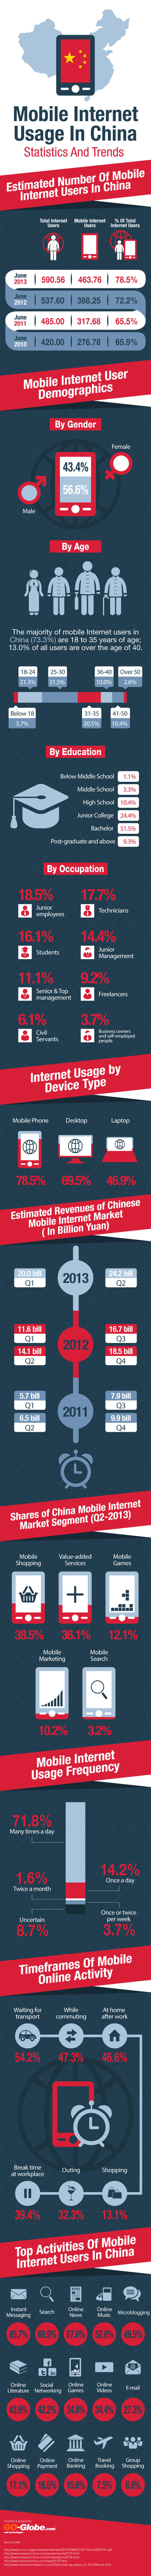 infographie-mobile-chine